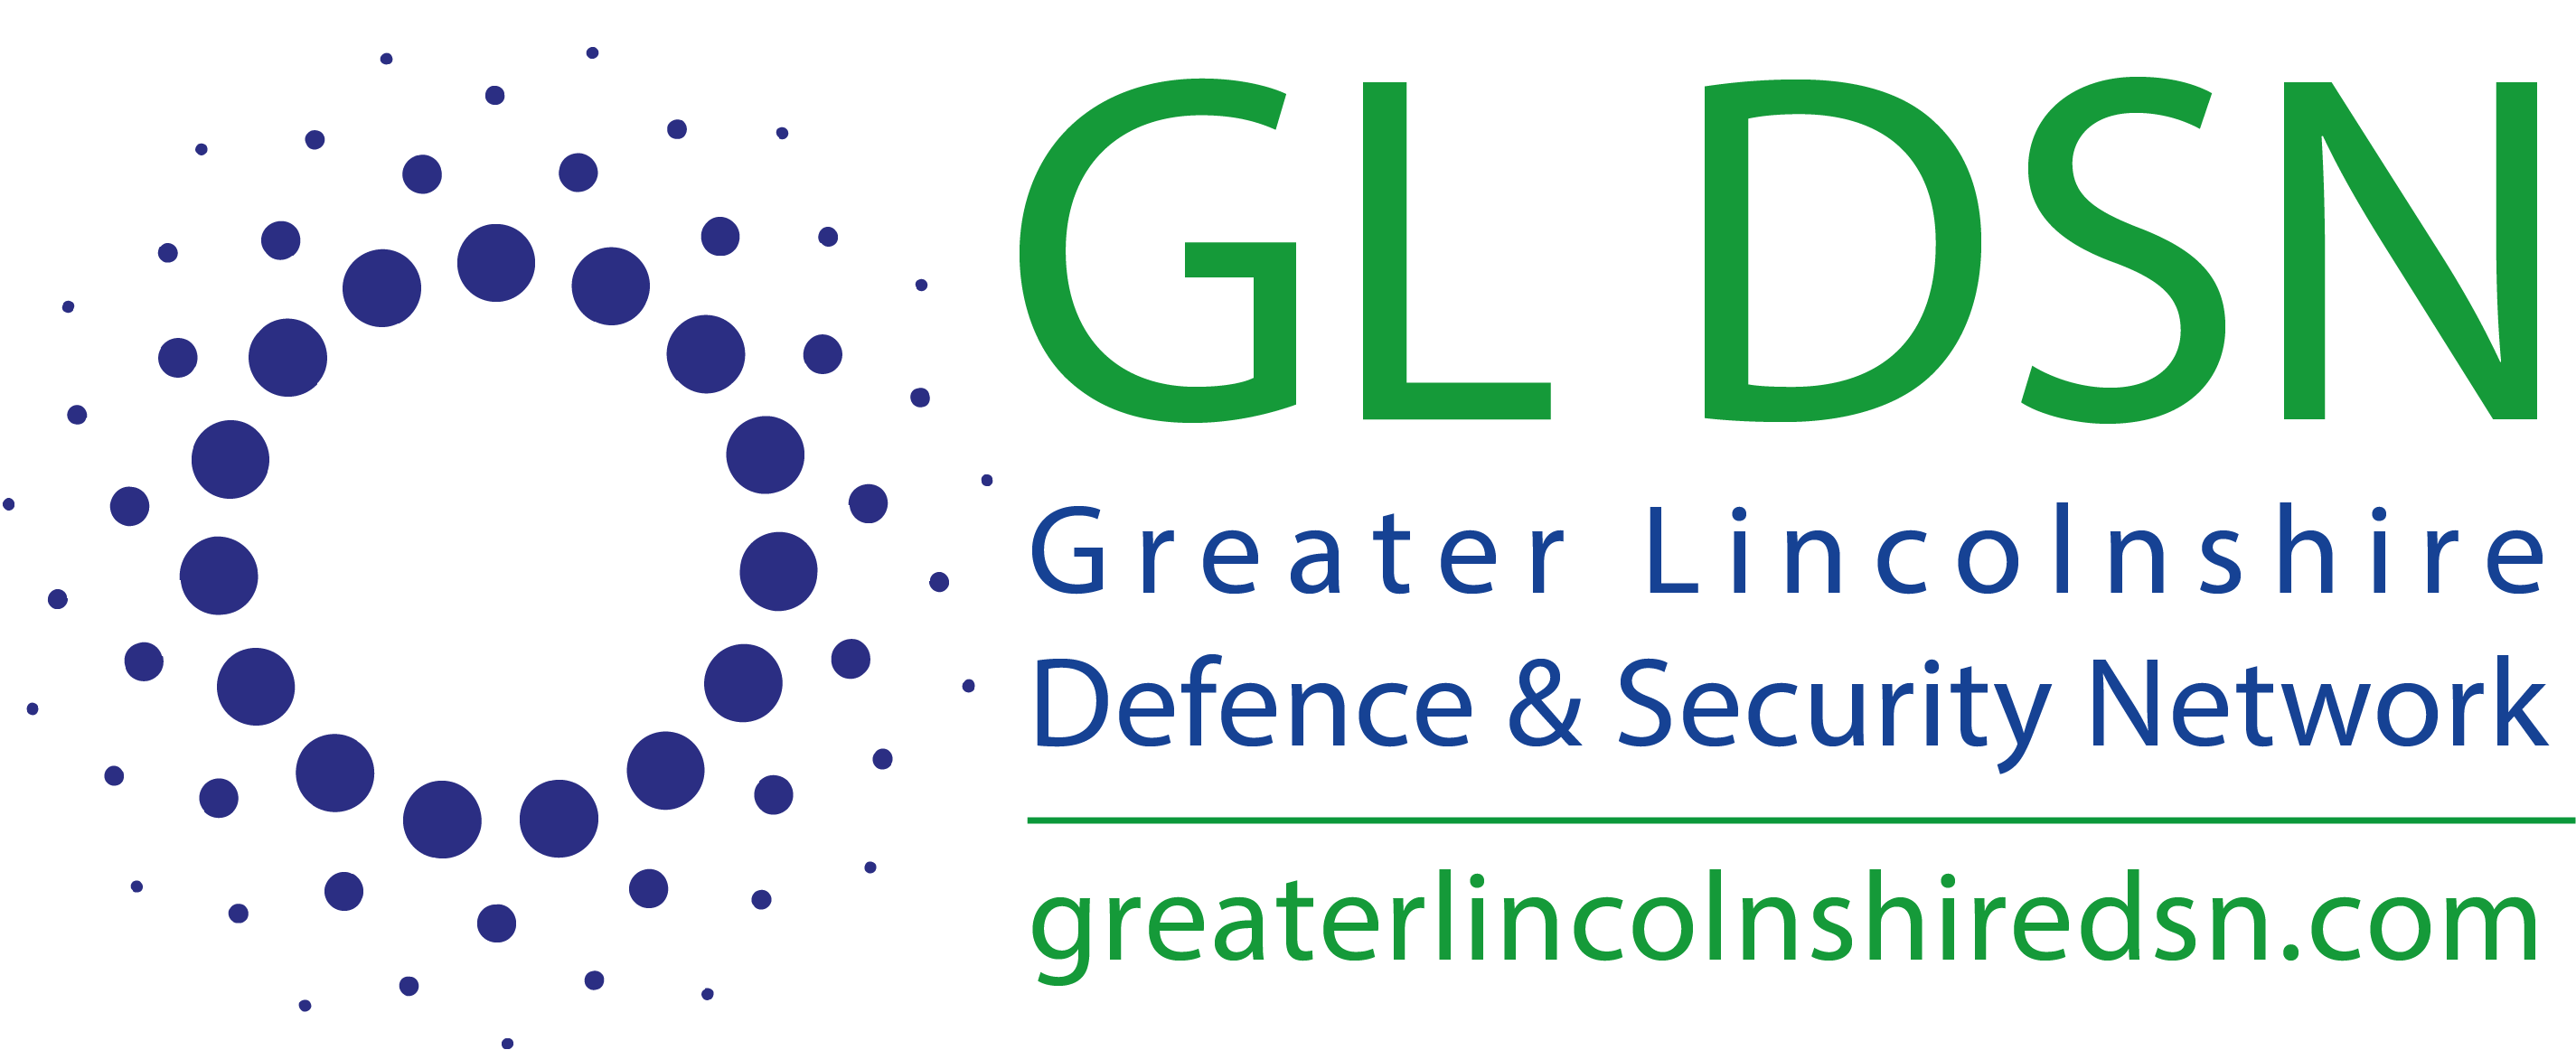 Greater Lincolnshire Defence and Security Network logo